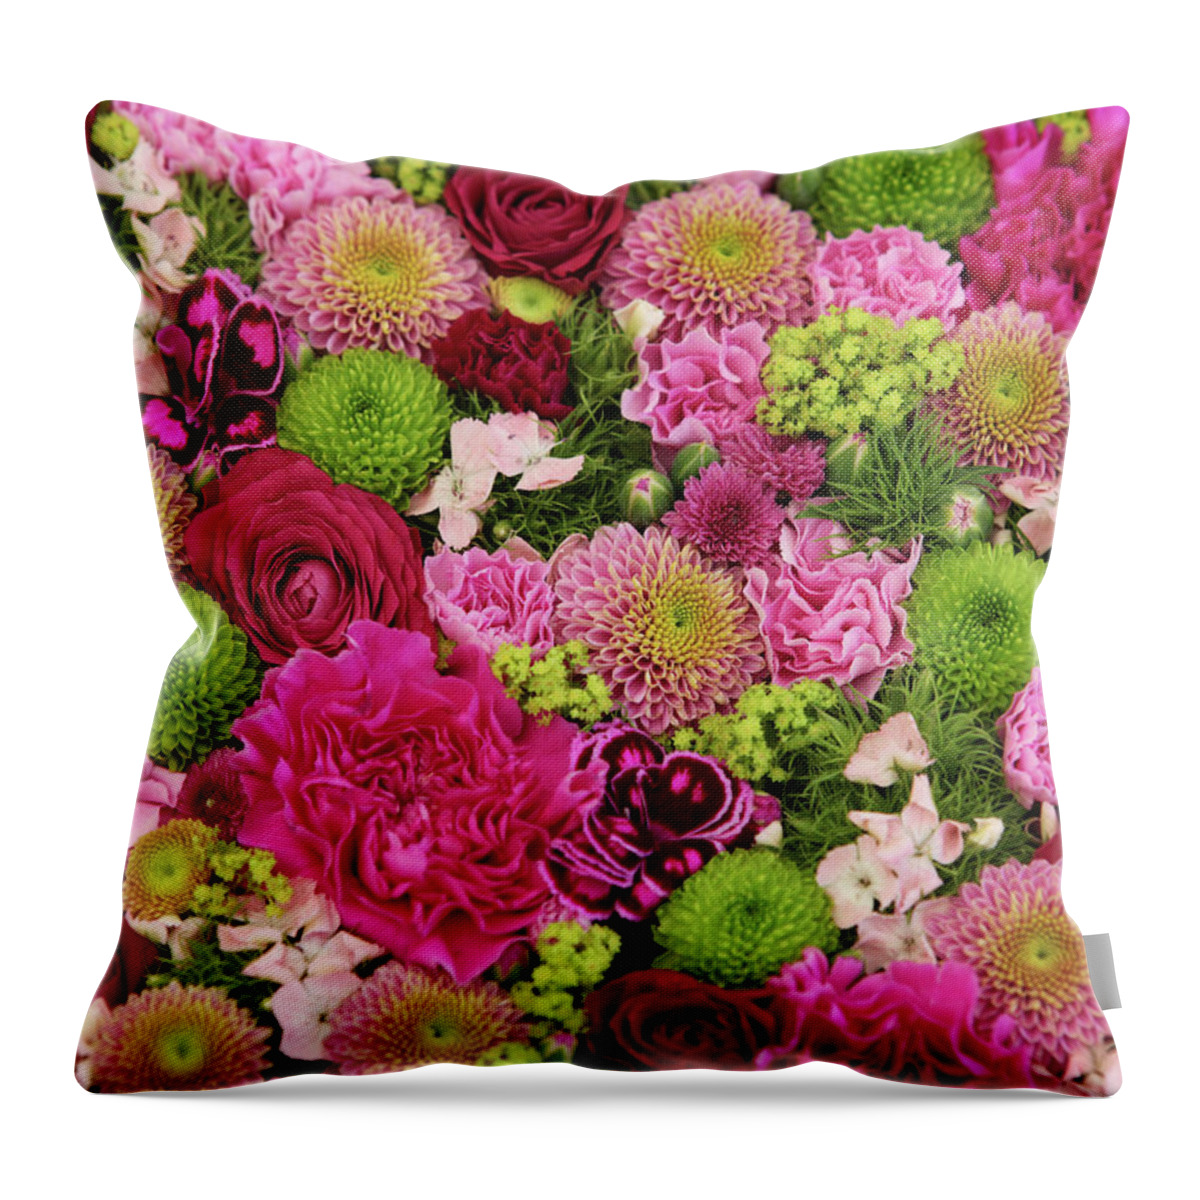 Chrysanthemum Throw Pillow featuring the photograph Beautiful Bunch Of Colorful Flowers by Lubilub